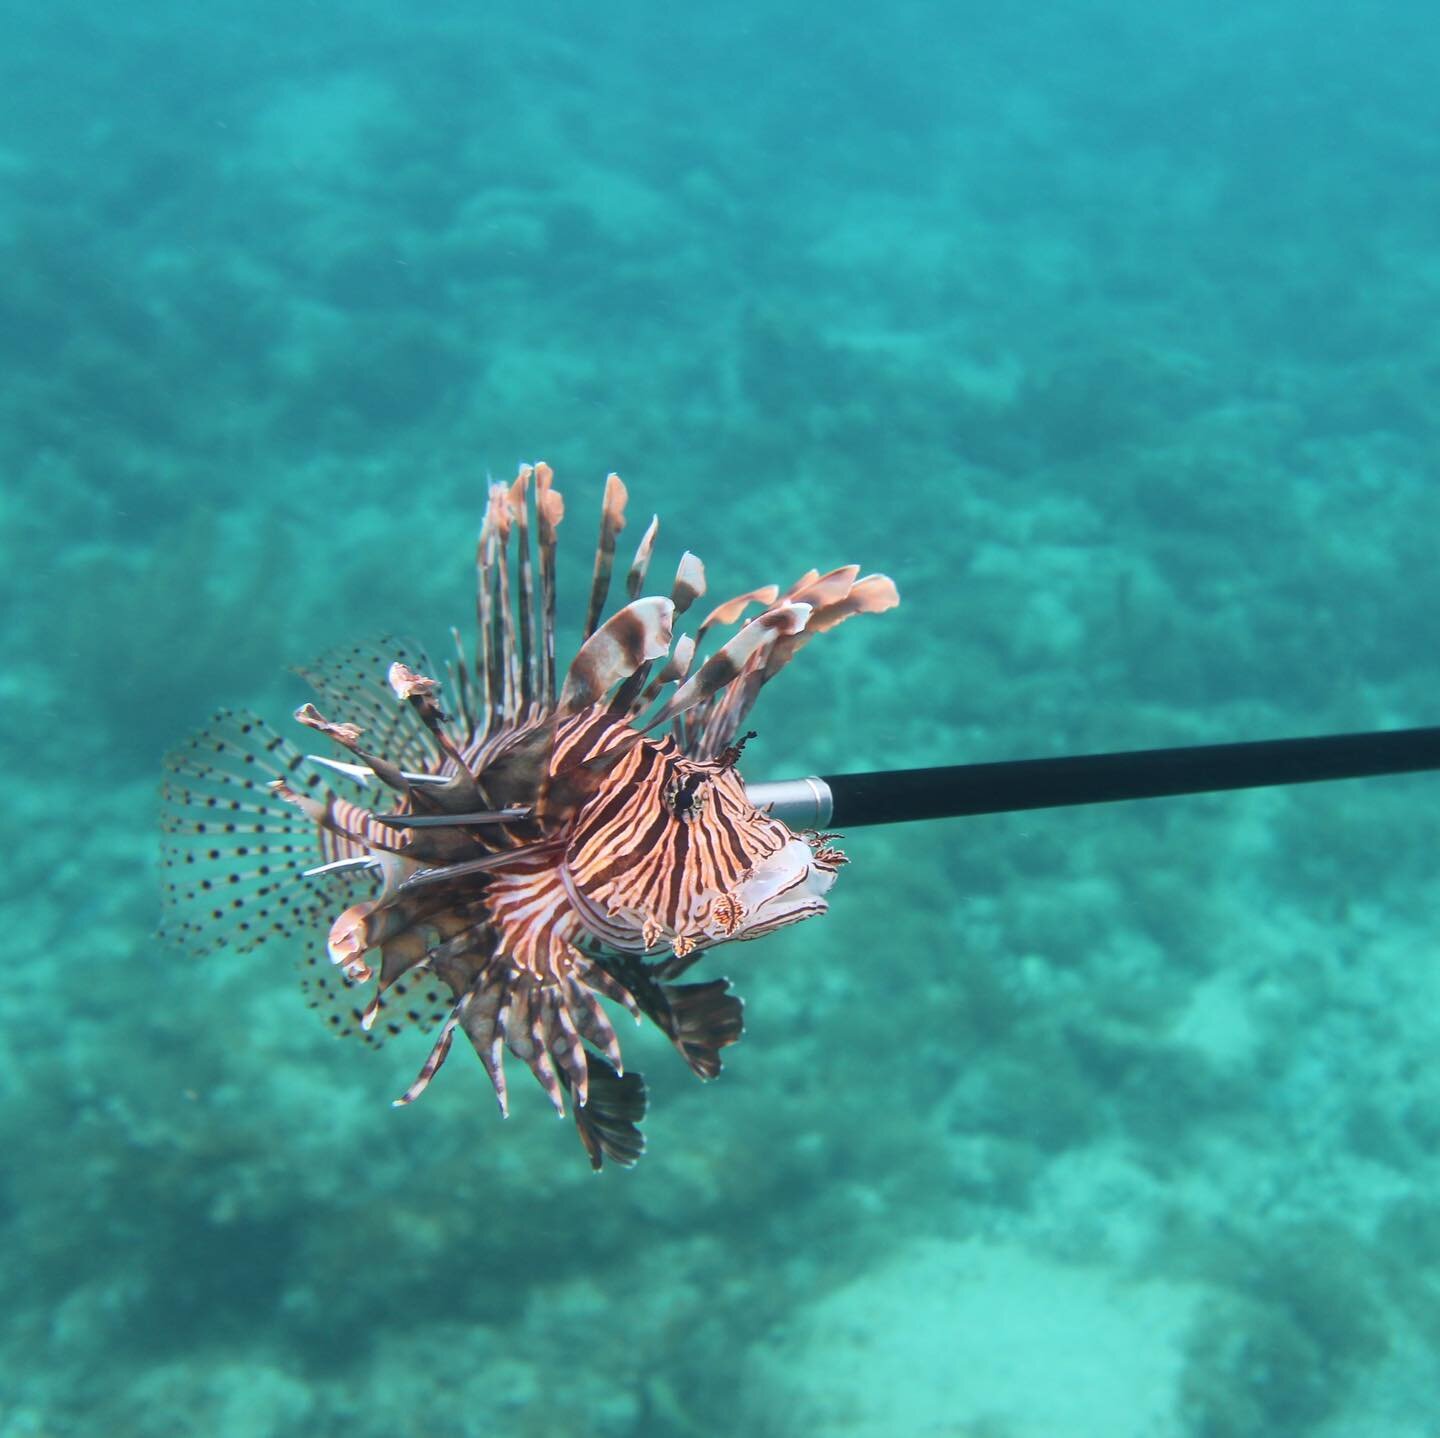 Lionfish are non-native and invasive in the Caribbean. Pretty to look at, but they gotta go. 👋